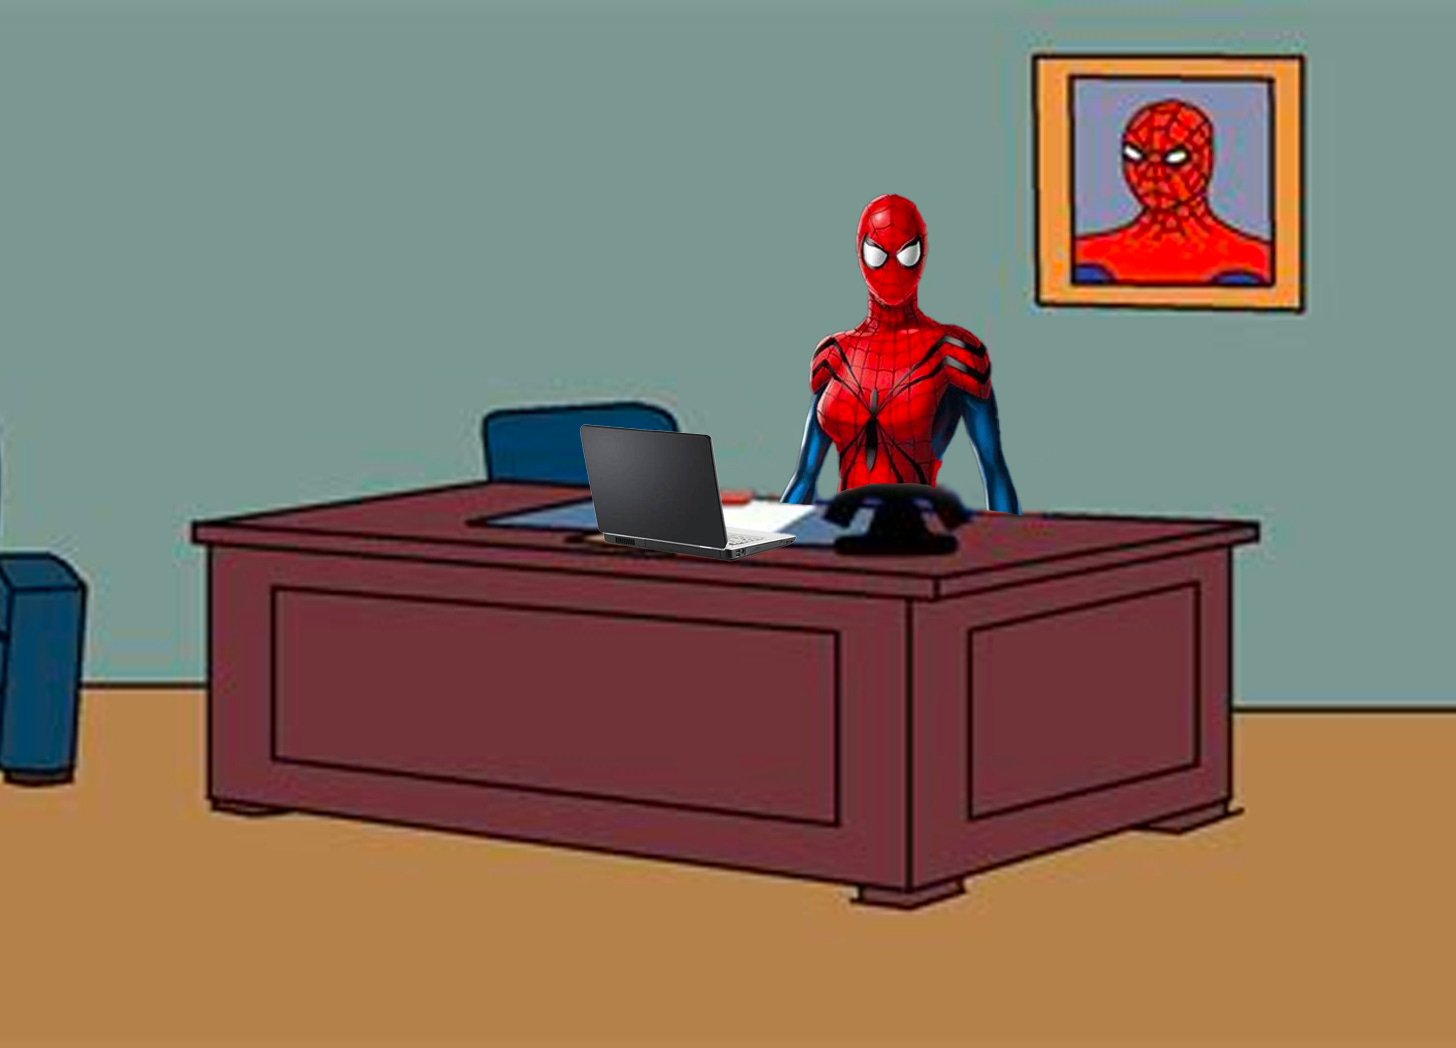 Illustration of Spider-woman sitting at desk, with Spiderman portrait on wall behind her